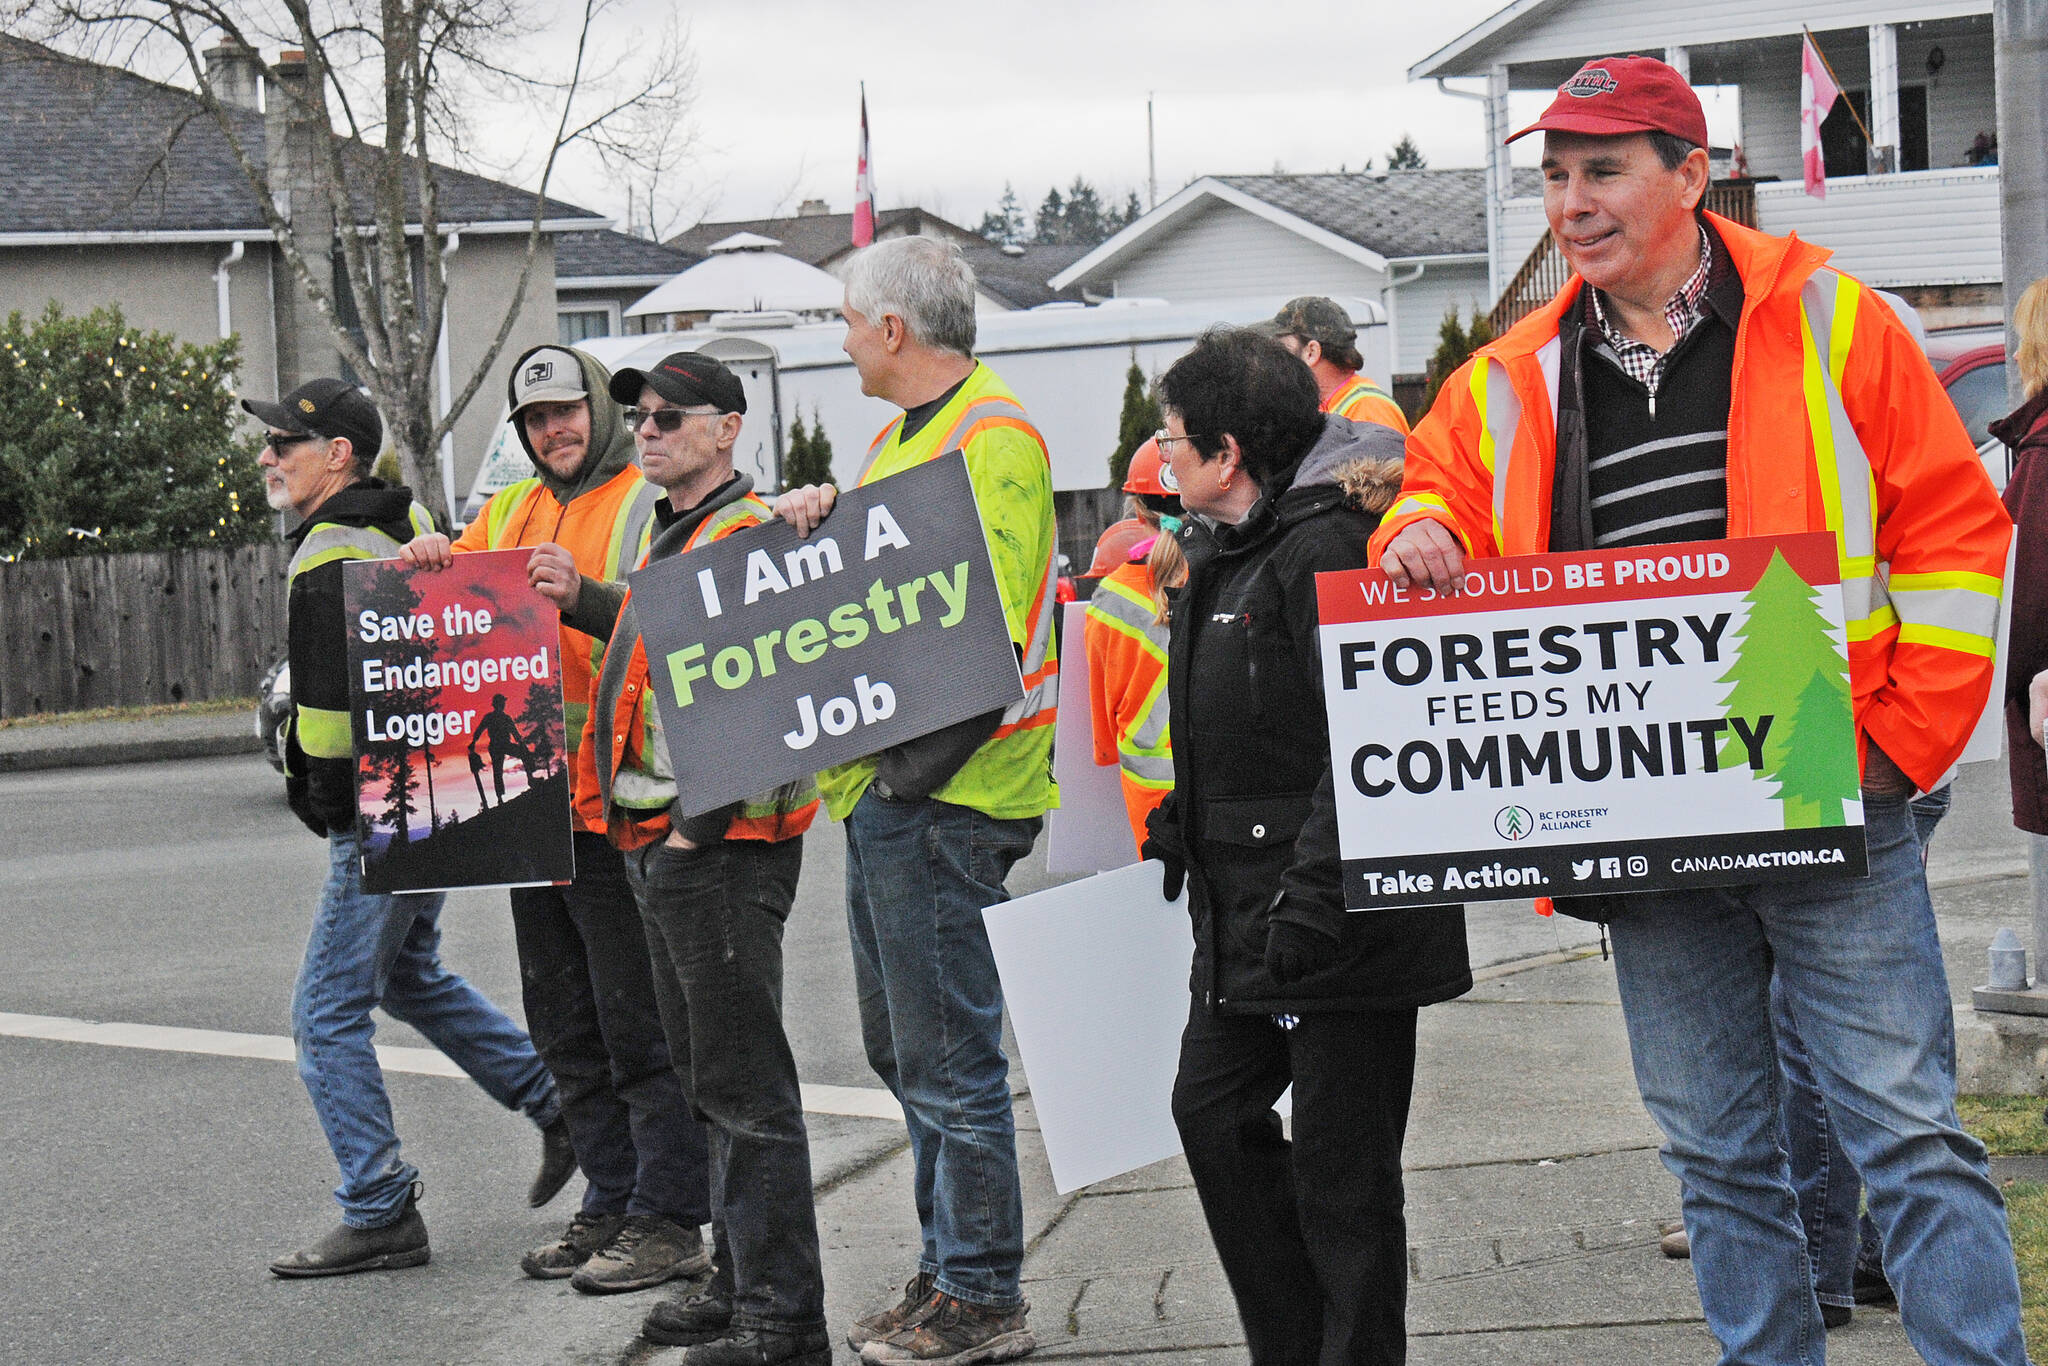 Larry Spencer, right, has been involved in the logging industry for 45 years. He attended a rally Thursday, Dec. 9, 2021 in Port Alberni backing loggers and their stance against the B.C. government’s recent two-year deferral of old-growth logging. (SUSAN QUINN/ Alberni Valley News)